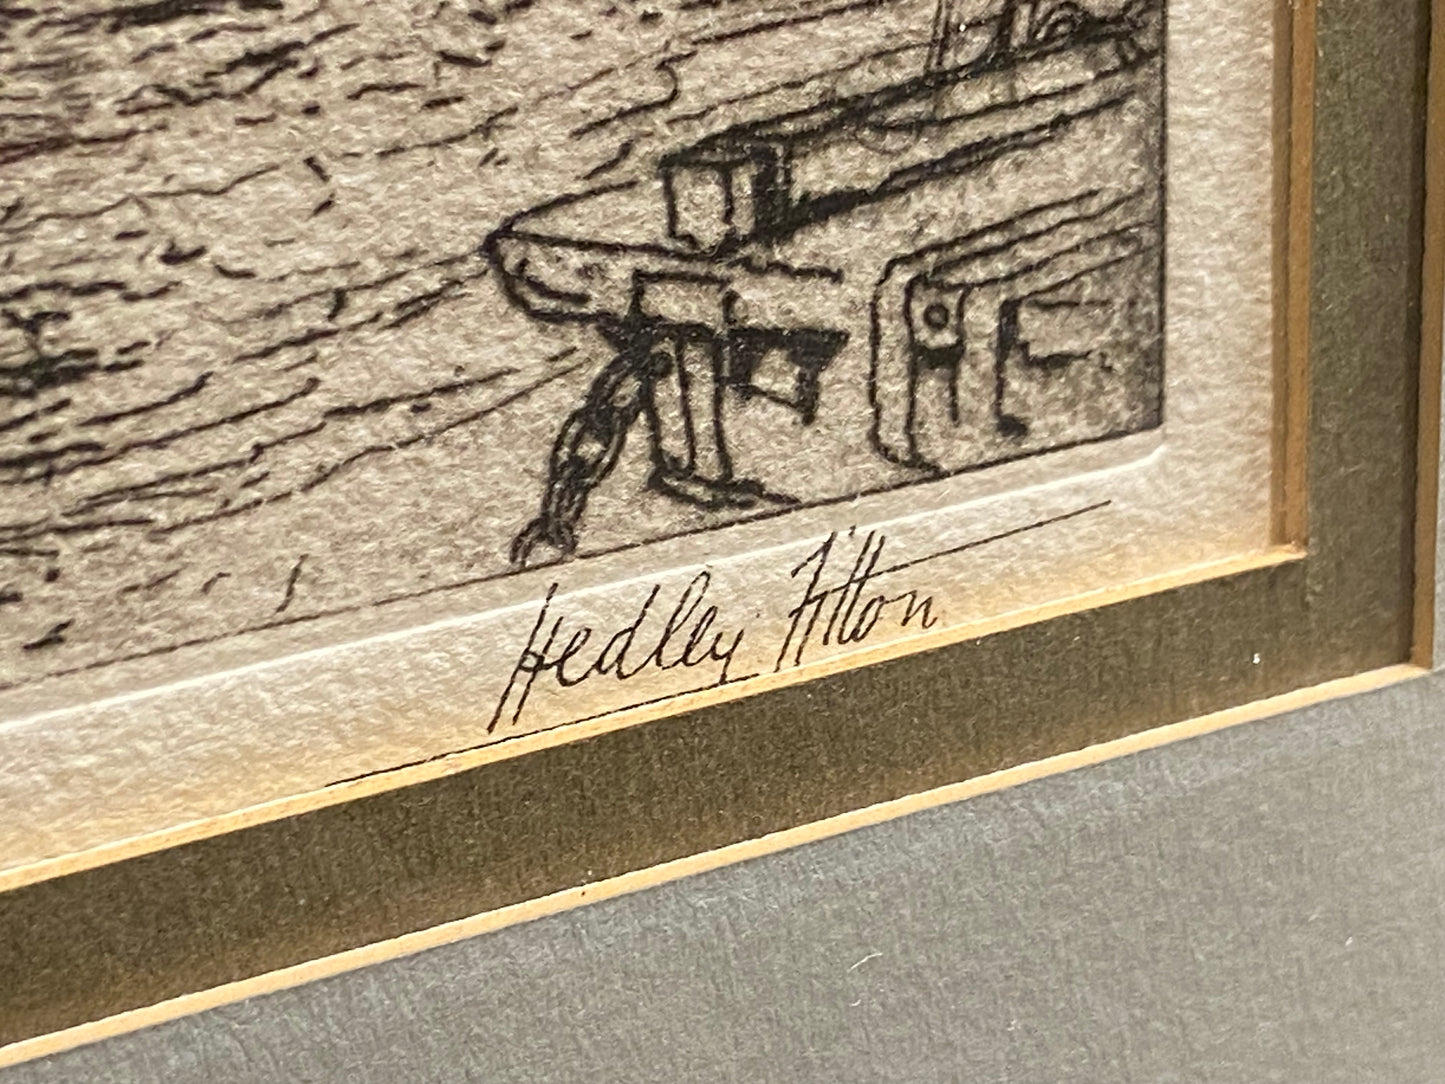 Hedley Fitton "Two Miils" Etching (27359)